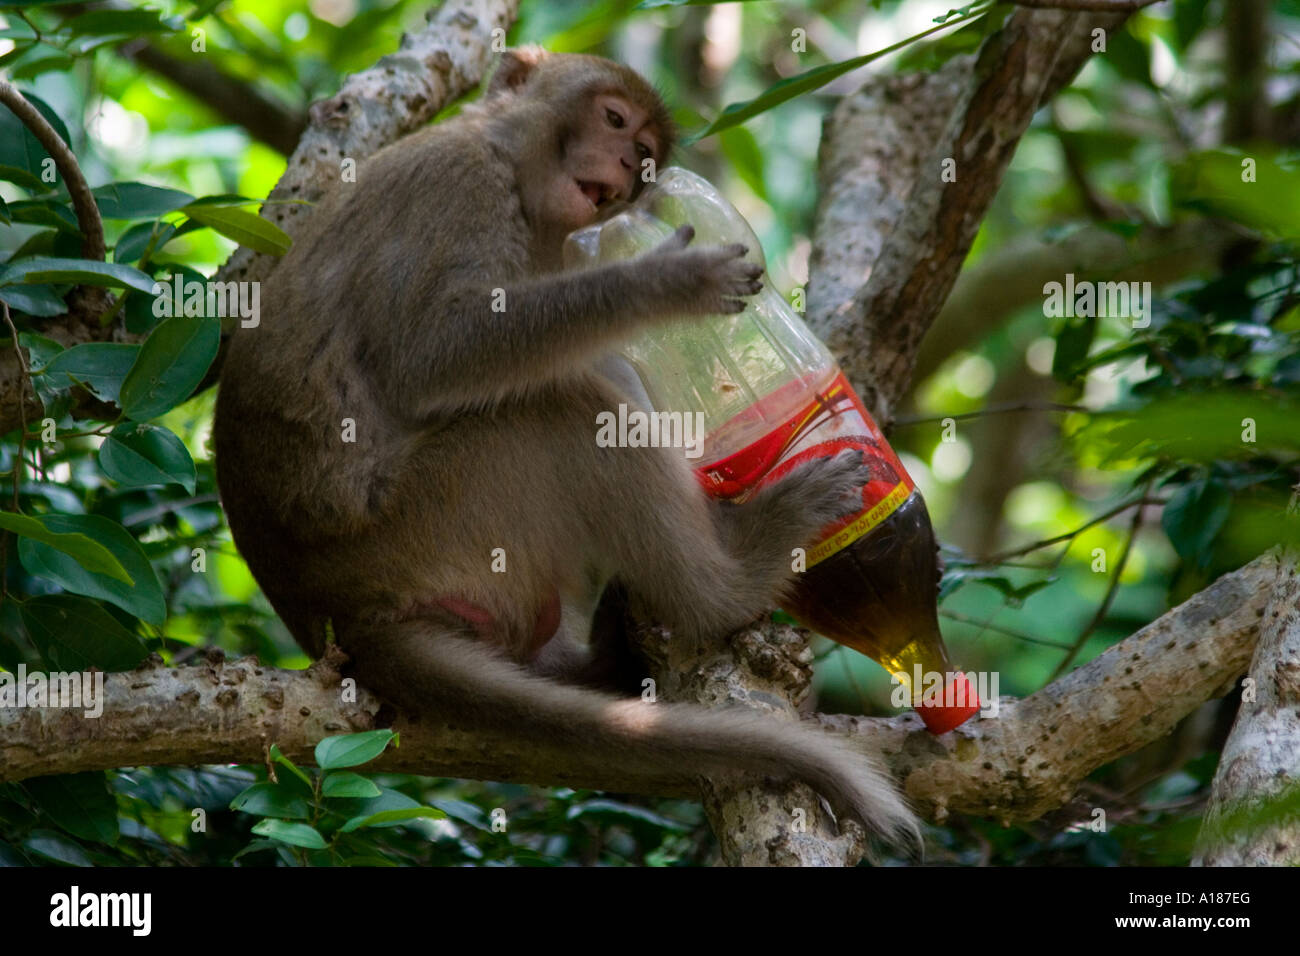 2007 Red Faced Long Tailed Macaque Monkey trying to get into a Plastic Bottle of Coca Cola Monkey Island Halong Bay Vietnam Stock Photo